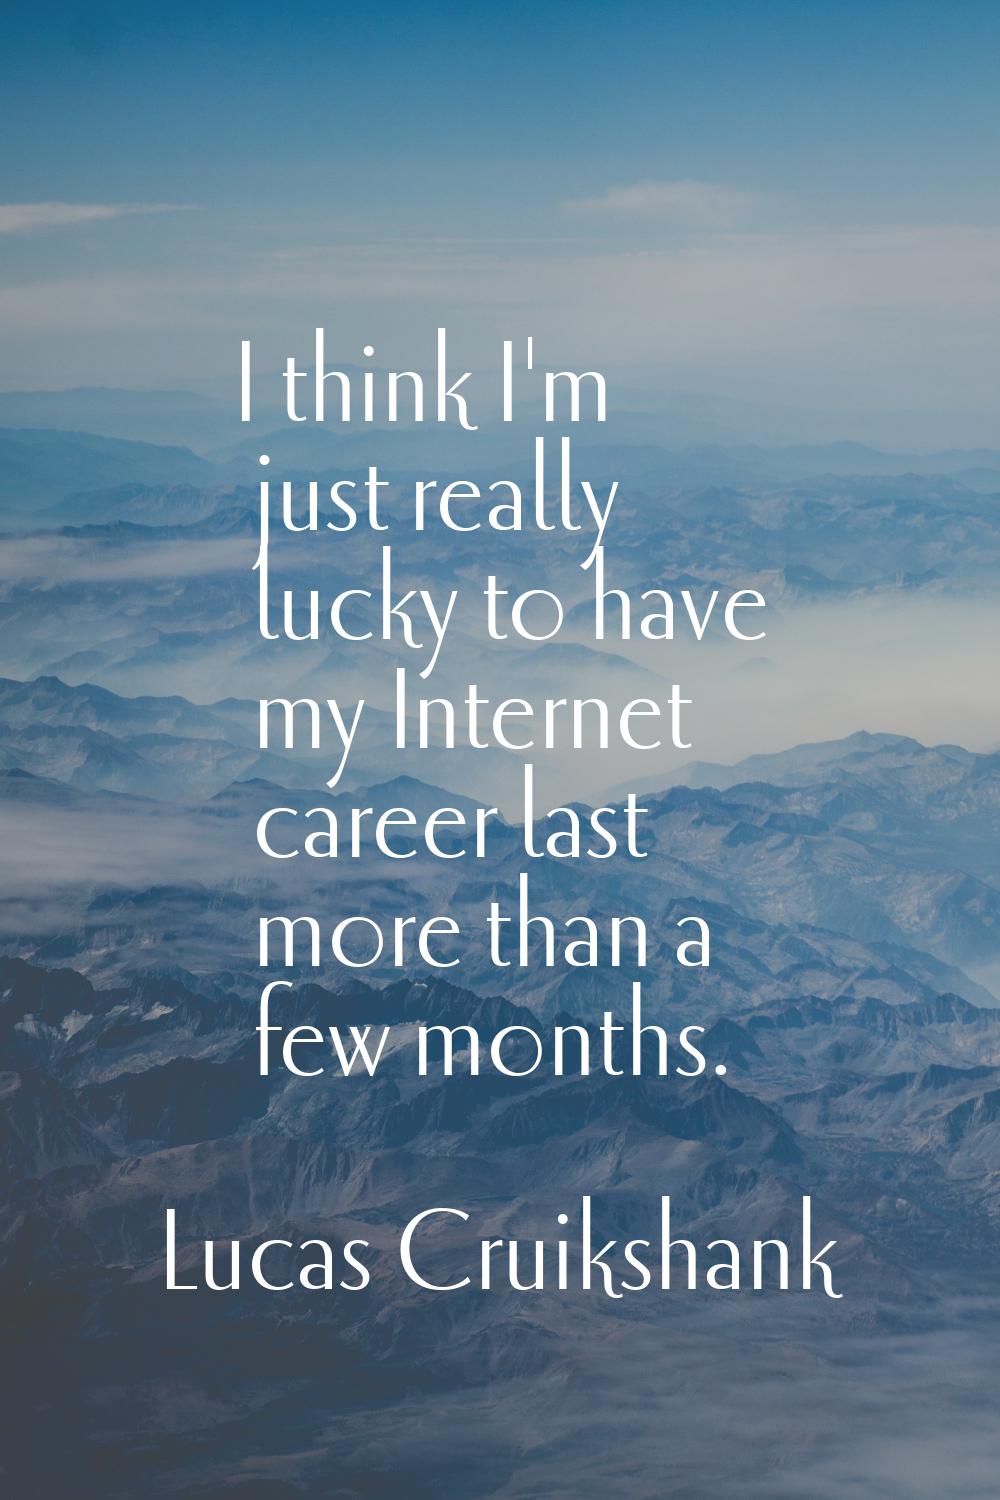 I think I'm just really lucky to have my Internet career last more than a few months.